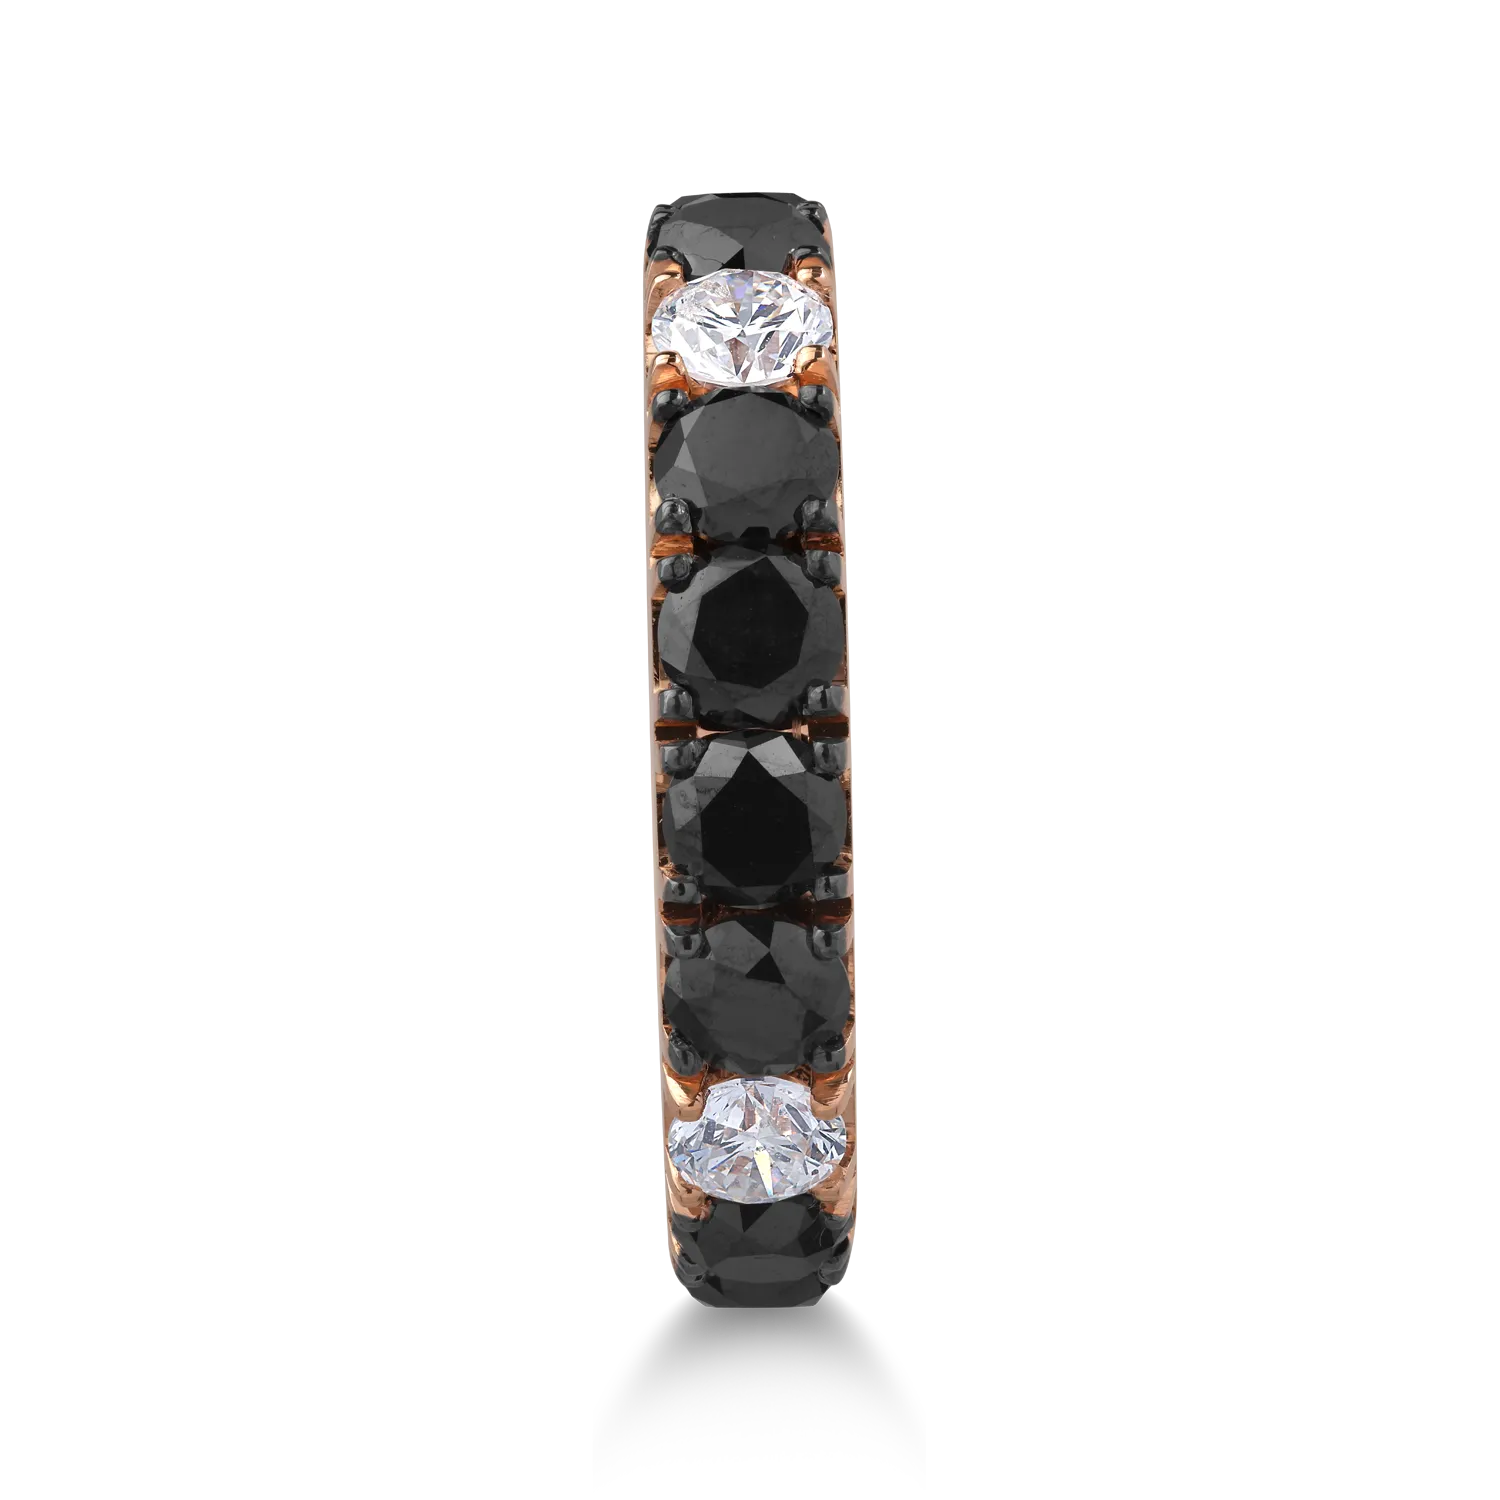 18K rose gold ring with 3.58ct black diamonds and 0.58ct clear diamonds